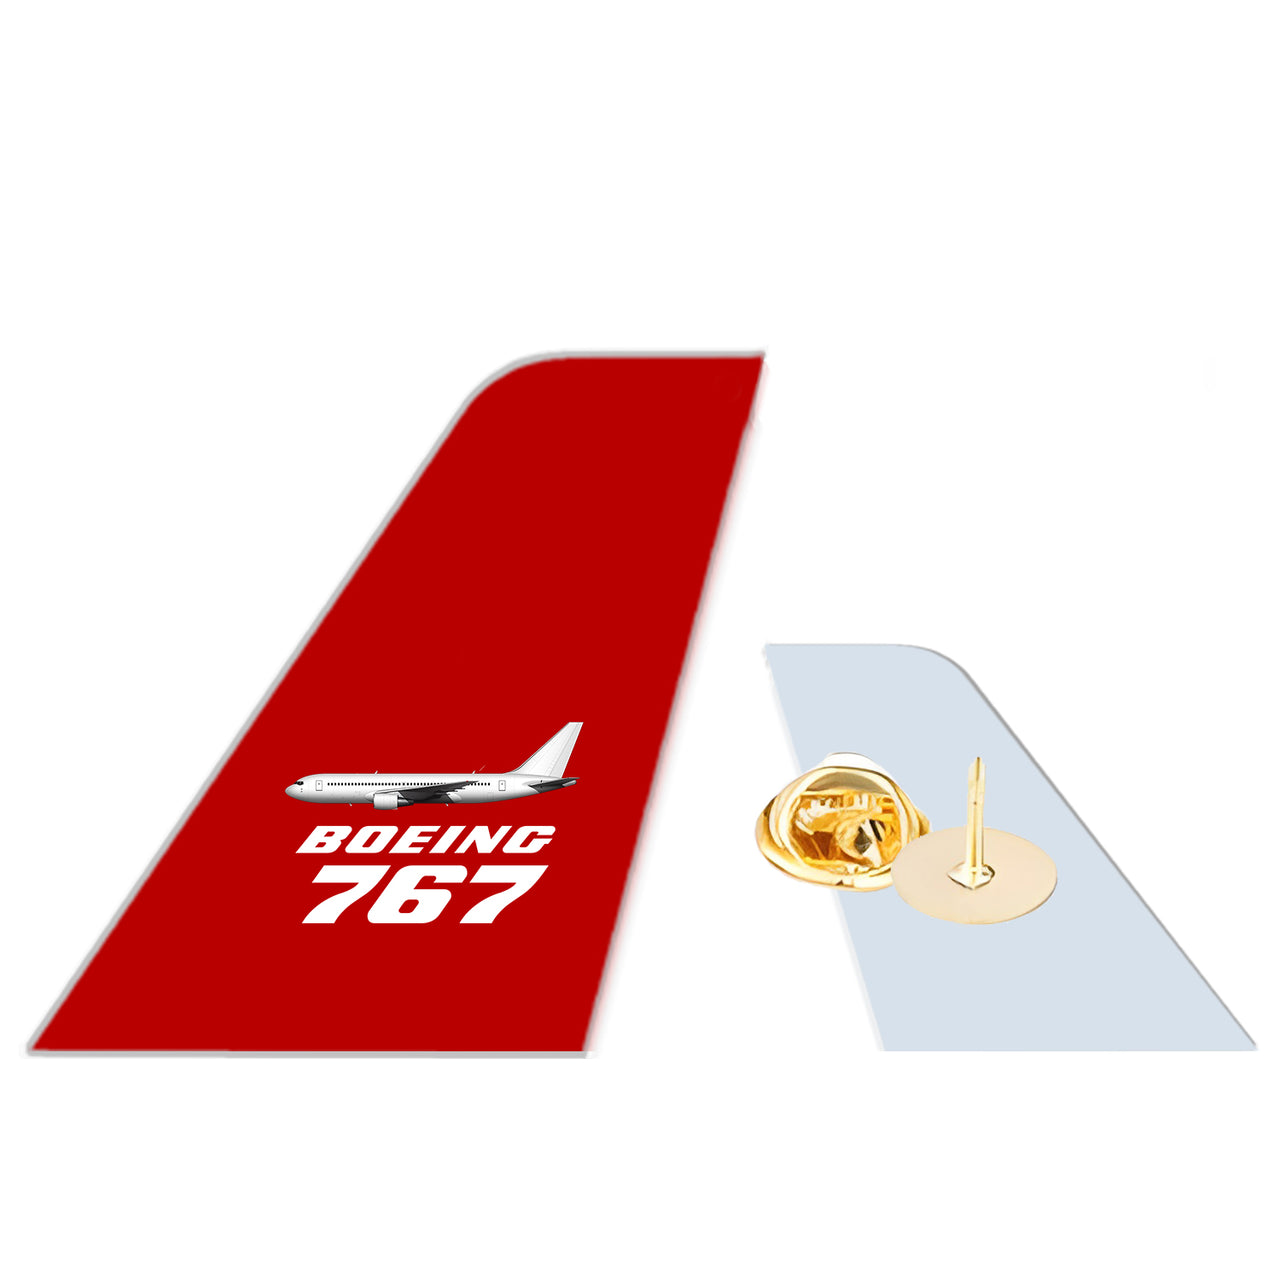 The Boeing 767 Designed Tail Shape Badges & Pins